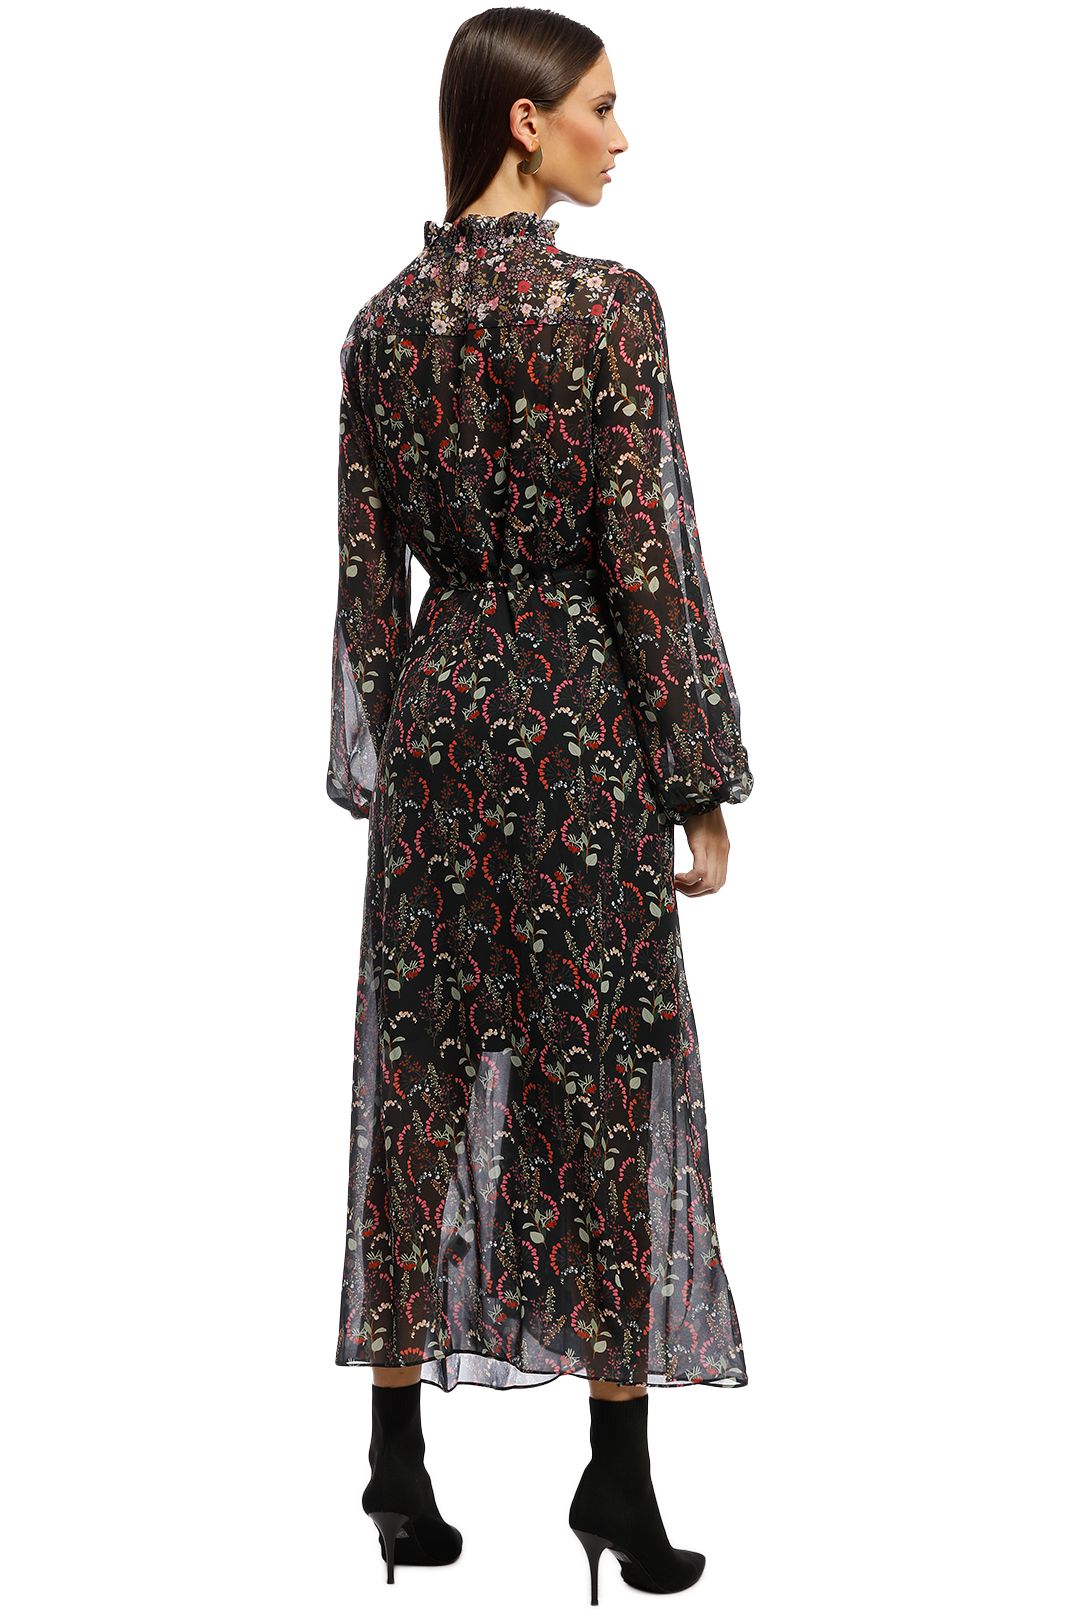 Cooper St - With A Kiss Long Sleeve Midi Dress - Black Floral - Back